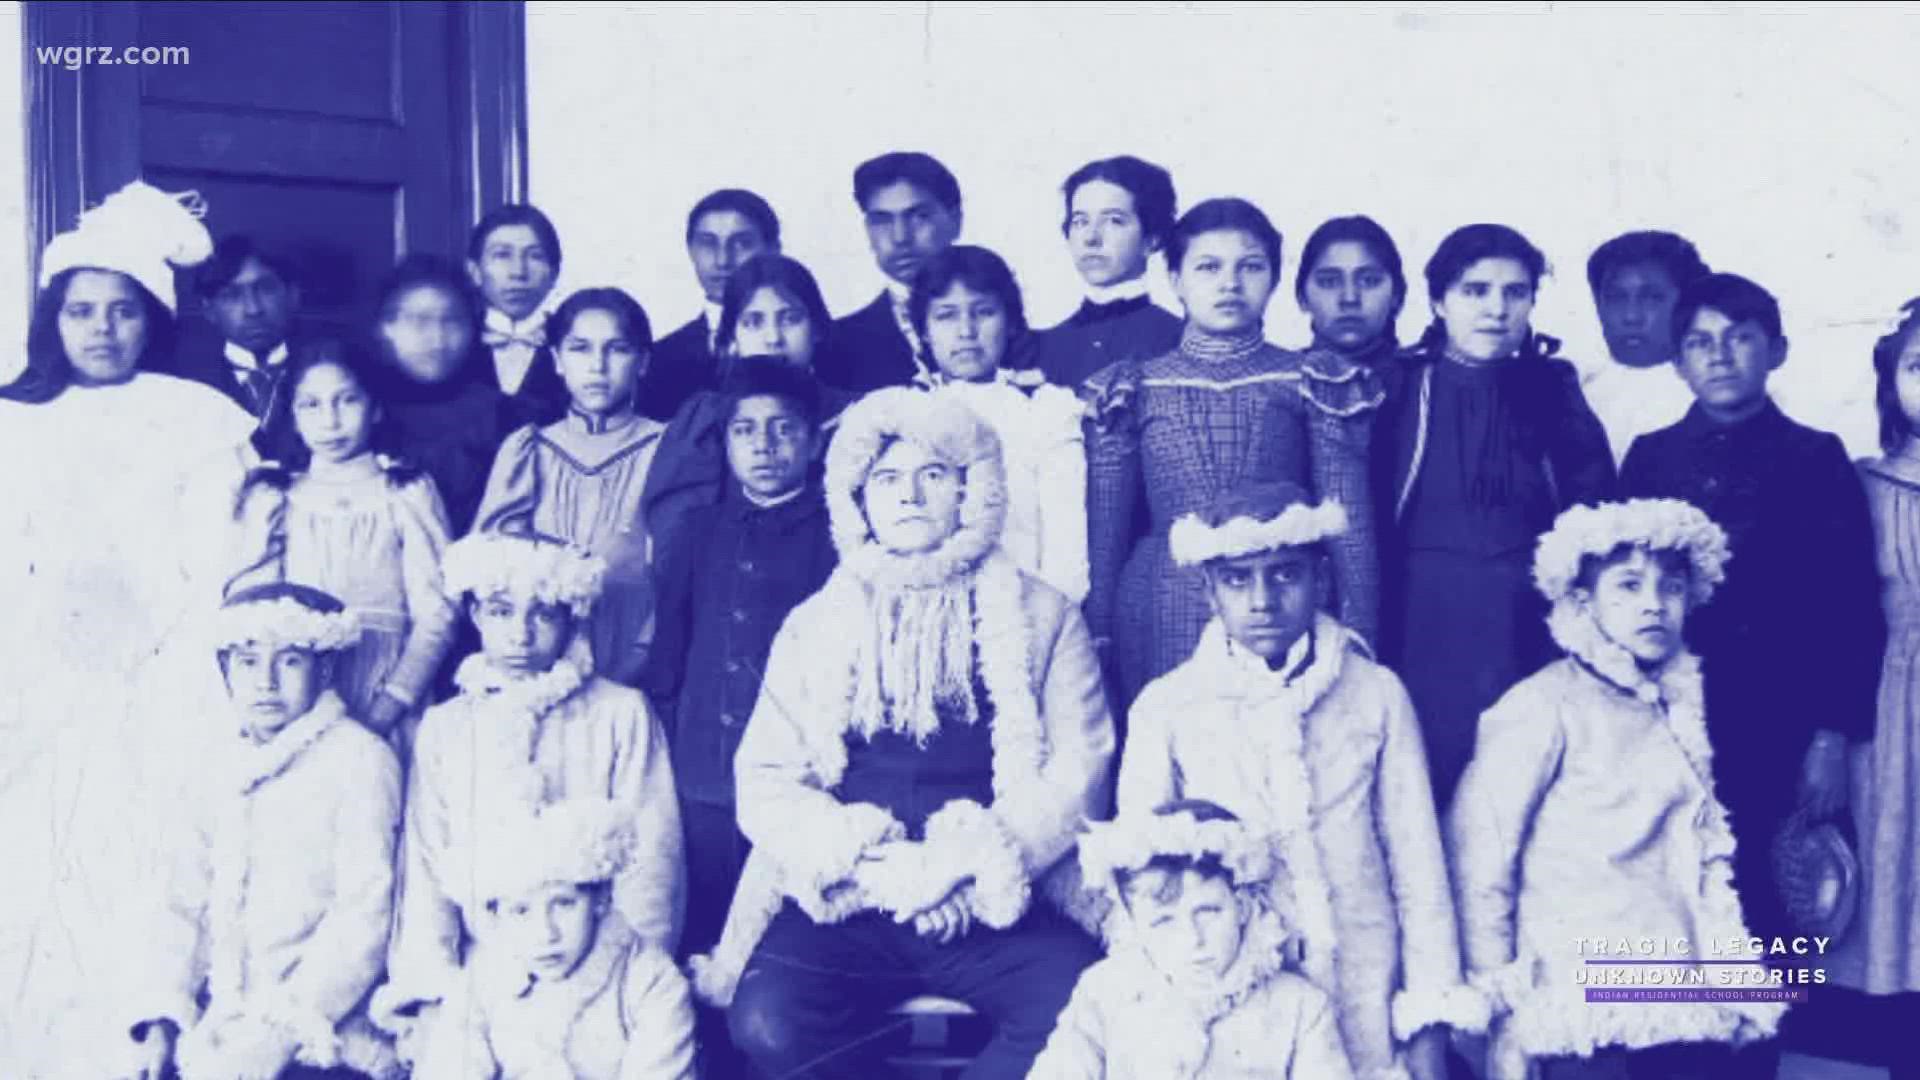 The Tragic Legacy: the unknown story of the Indian residential school program